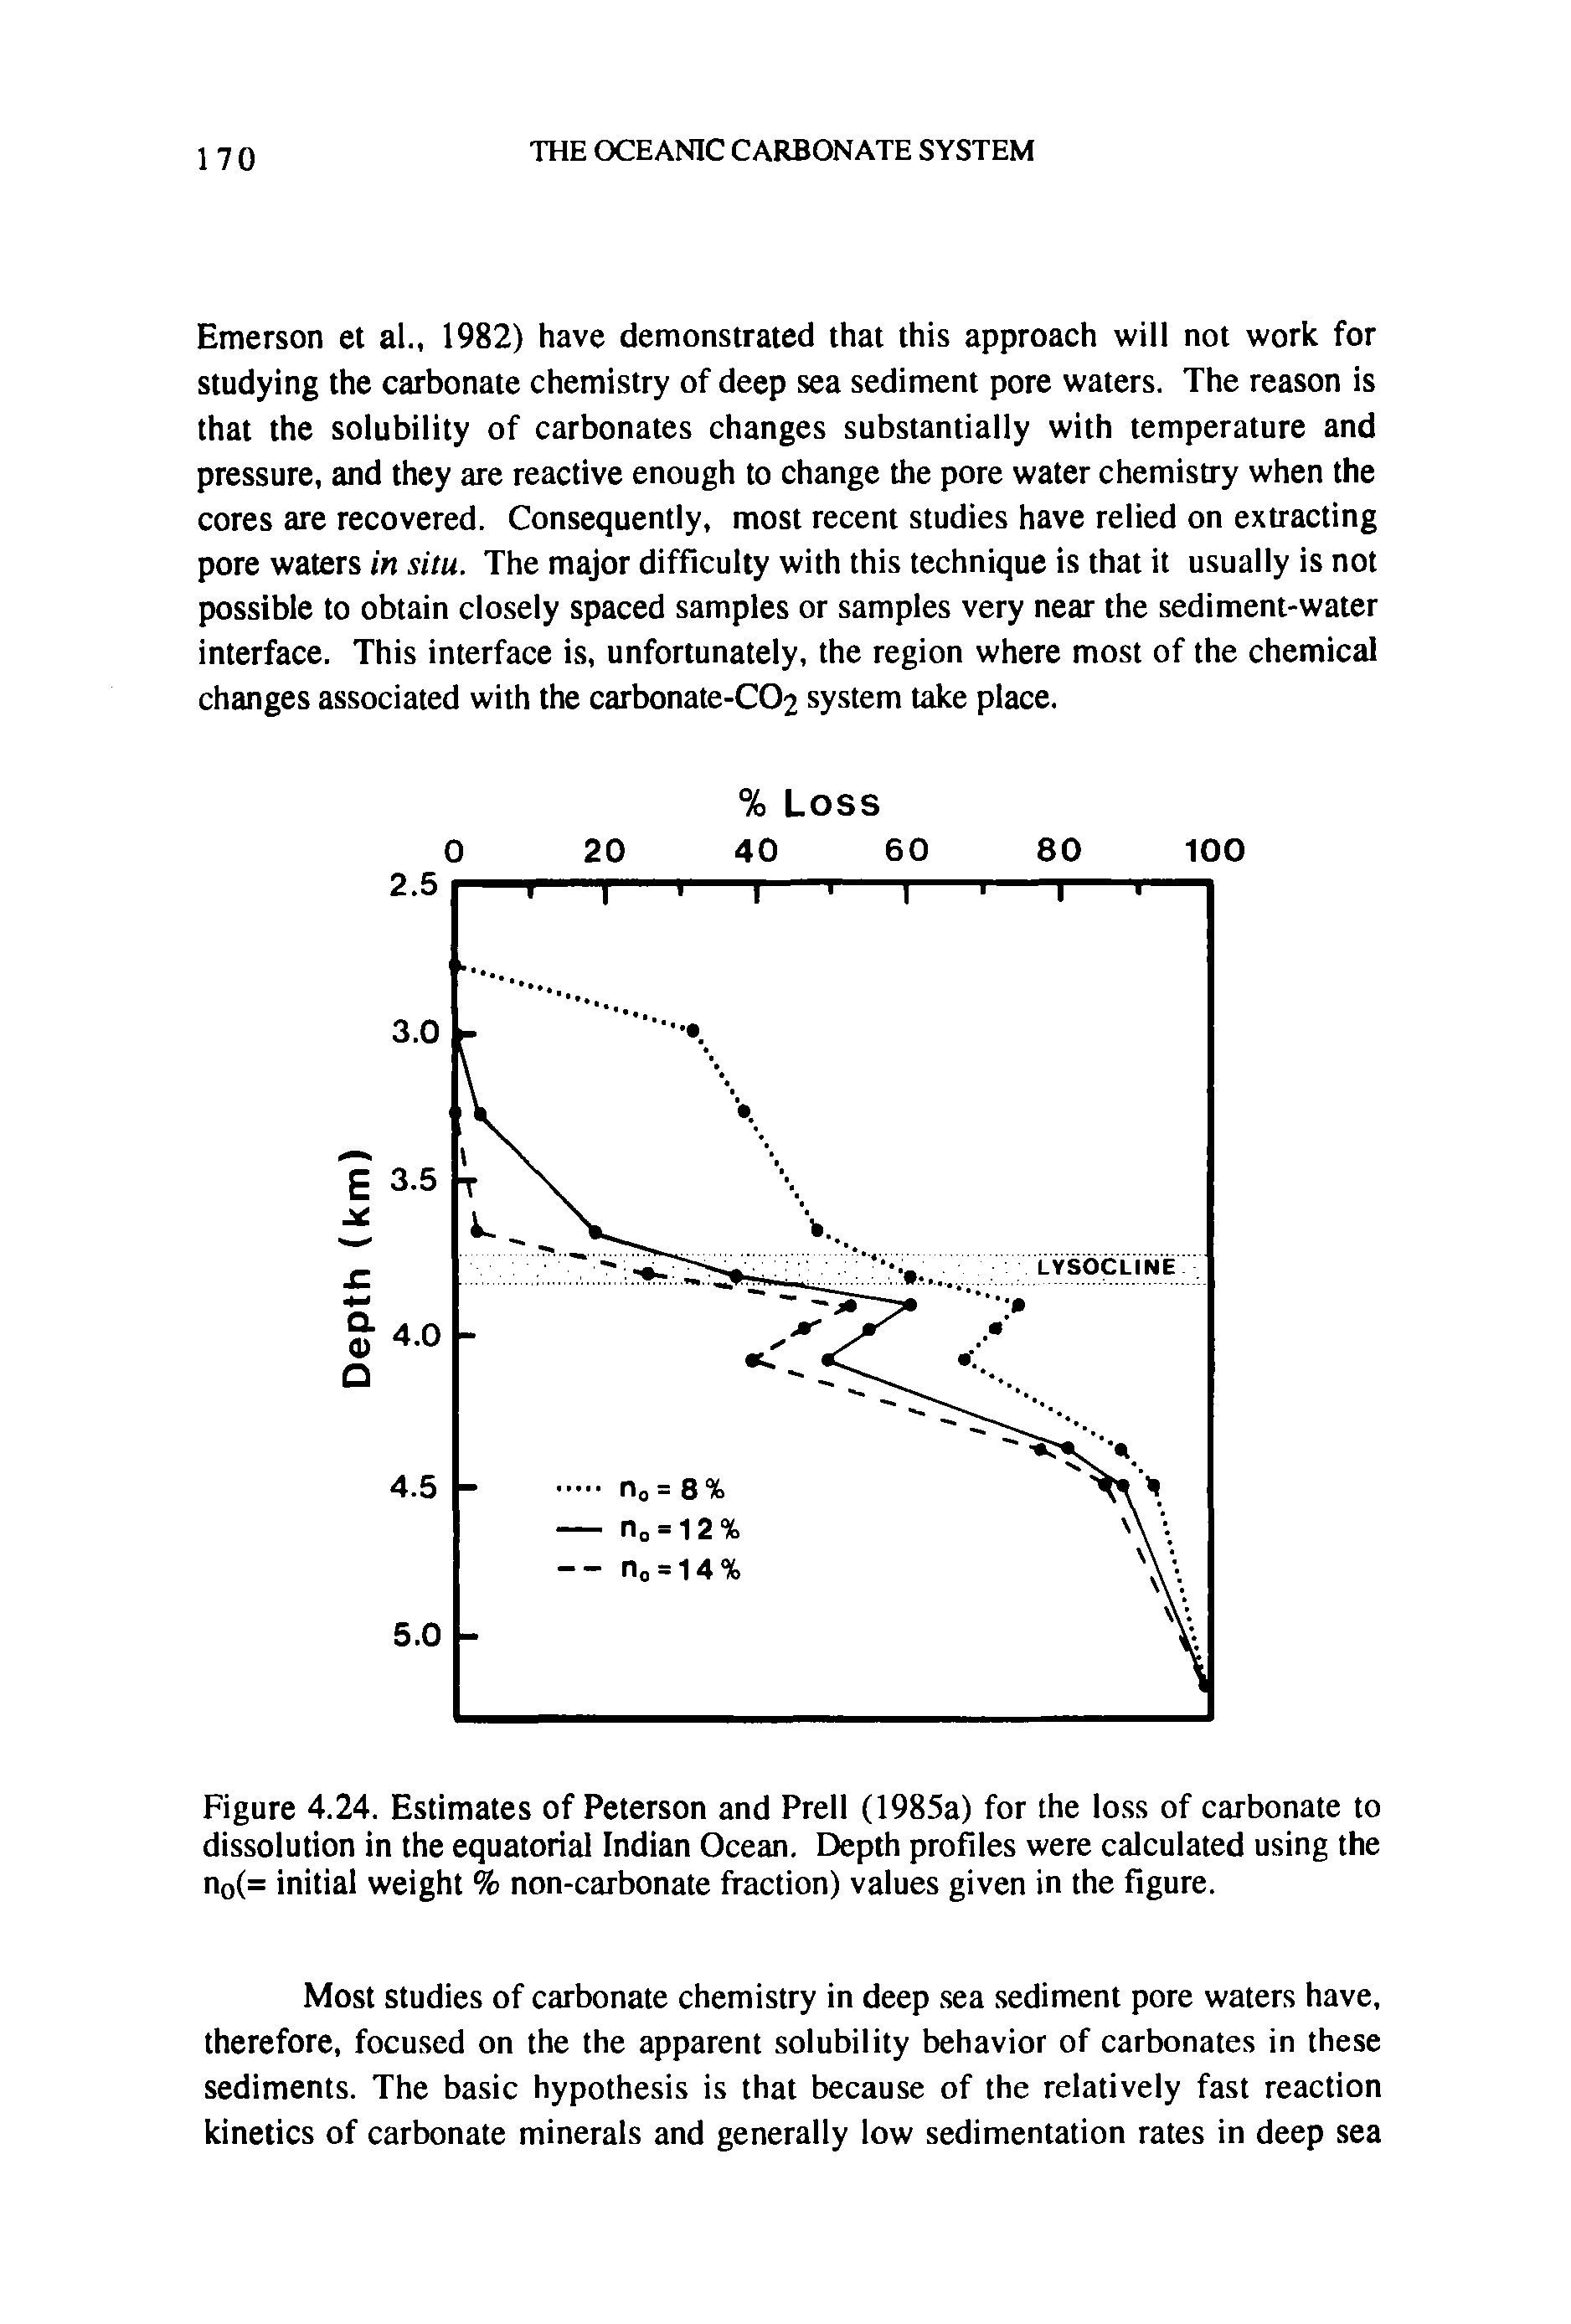 Figure 4.24. Estimates of Peterson and Prell (1985a) for the loss of carbonate to dissolution in the equatorial Indian Ocean. Depth profiles were calculated using the n0(= initial weight % non-carbonate fraction) values given in the figure.